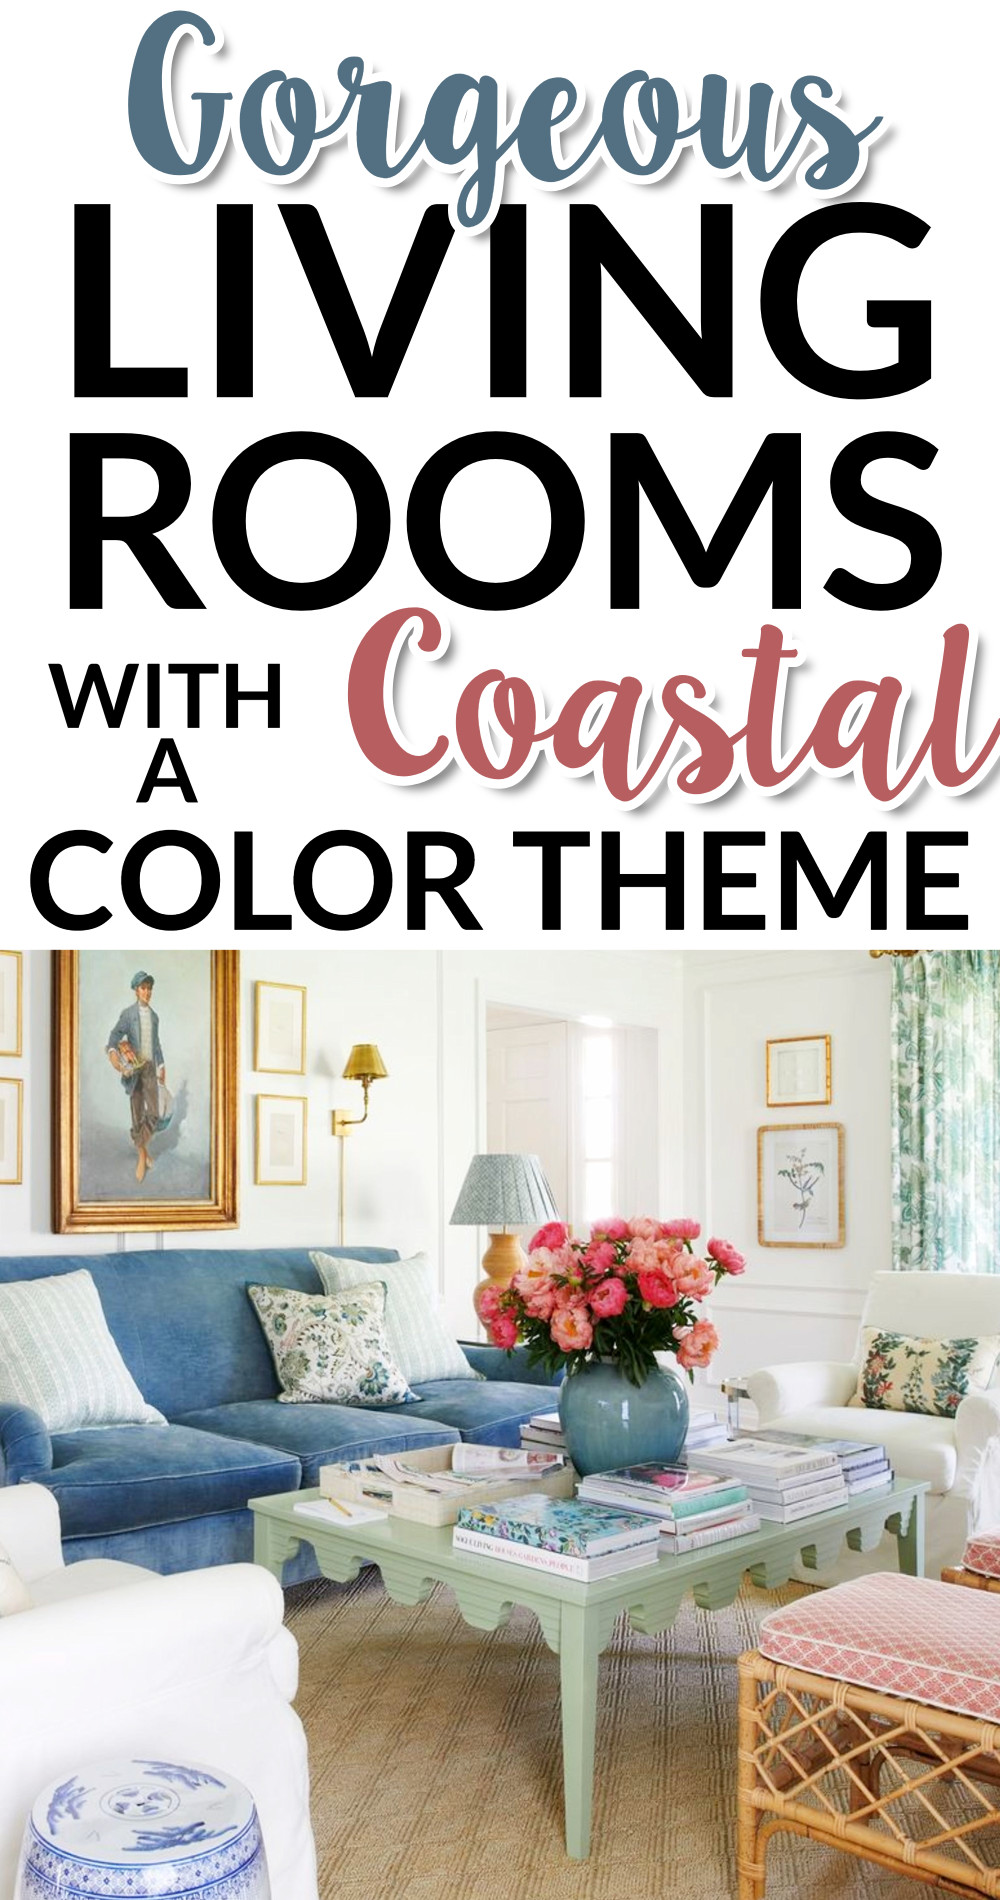 Gorgeous living rooms with a coastal color theme